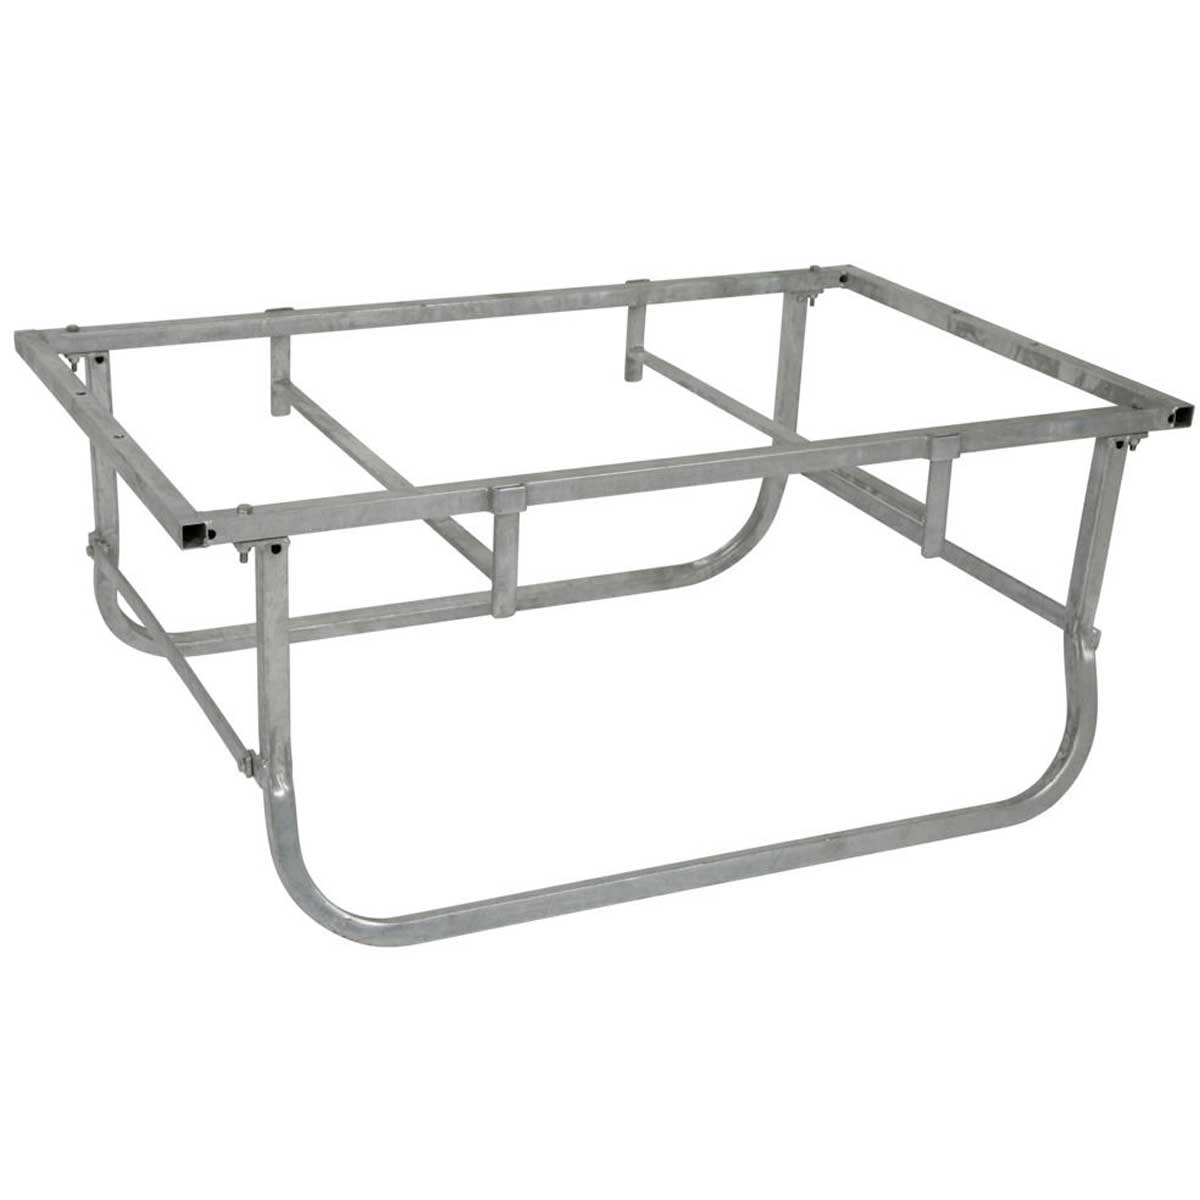 Feeding rack 112,5 cm without roof